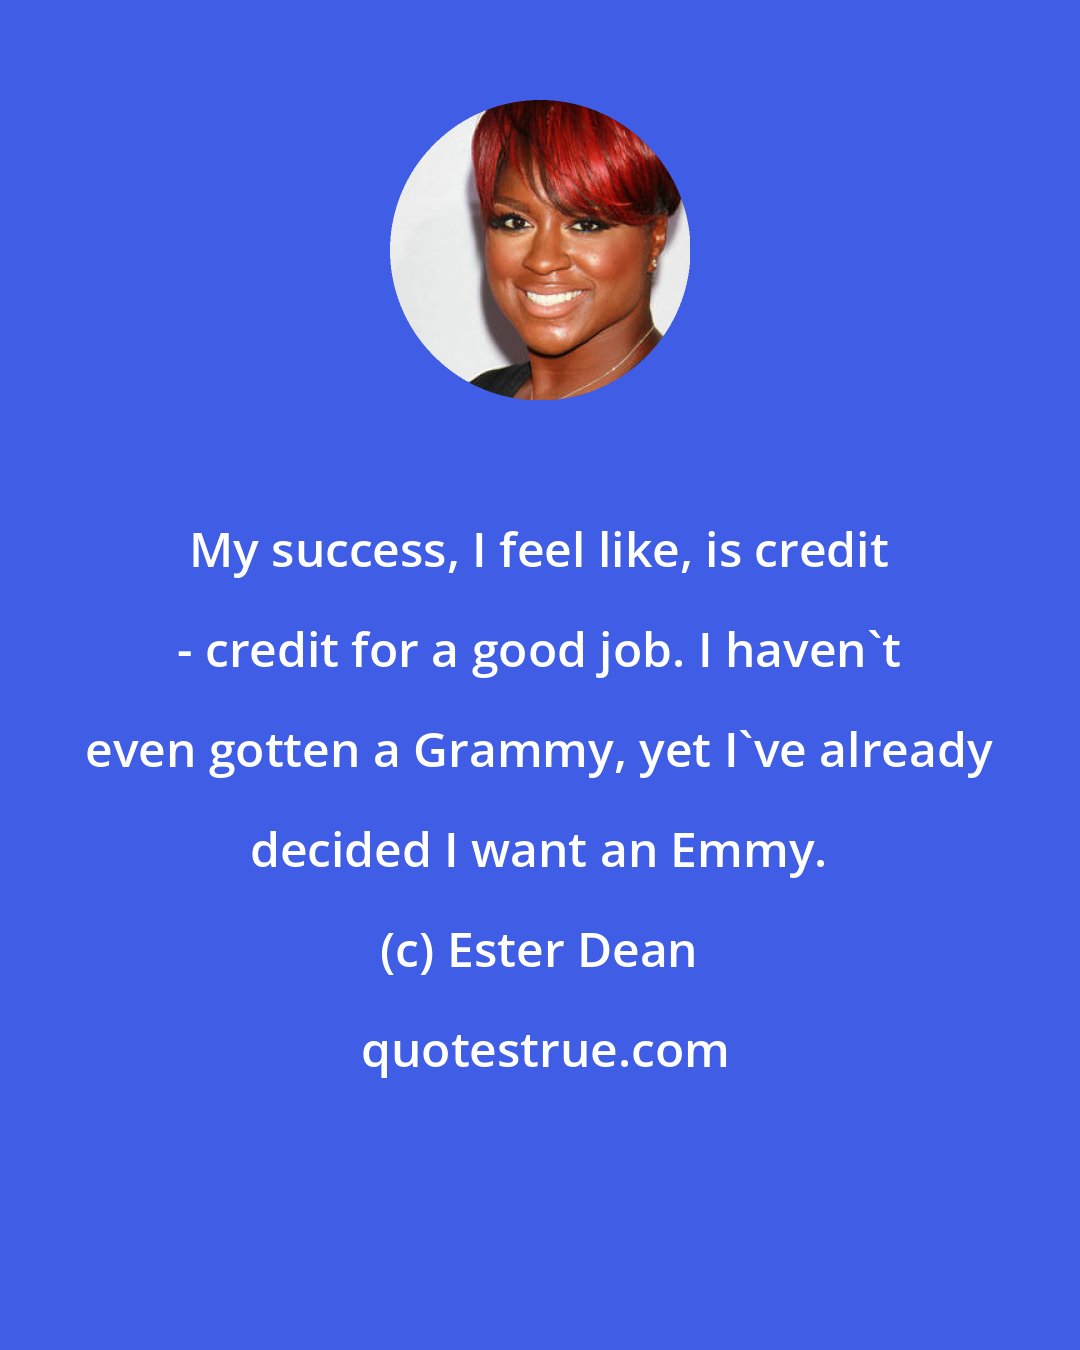 Ester Dean: My success, I feel like, is credit - credit for a good job. I haven't even gotten a Grammy, yet I've already decided I want an Emmy.